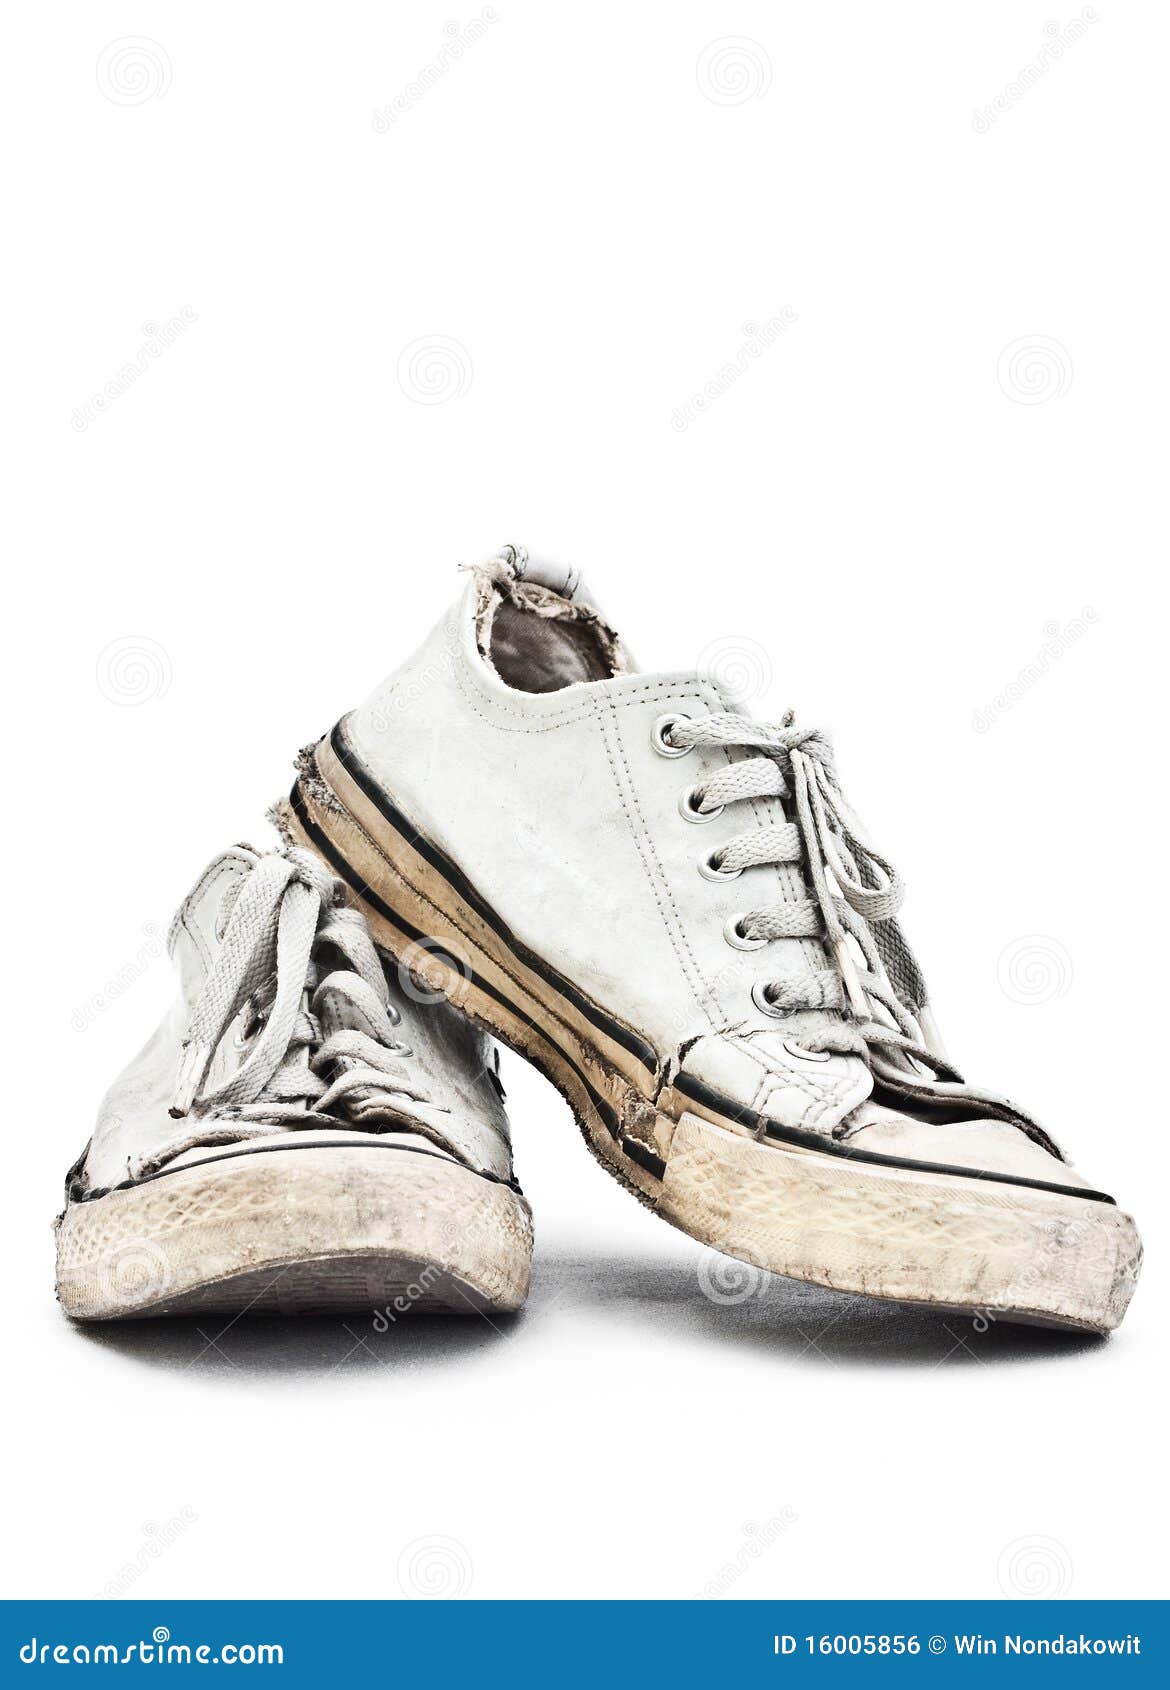 Vintage sneaker stock photo. Image of pair, leather, background - 16005856